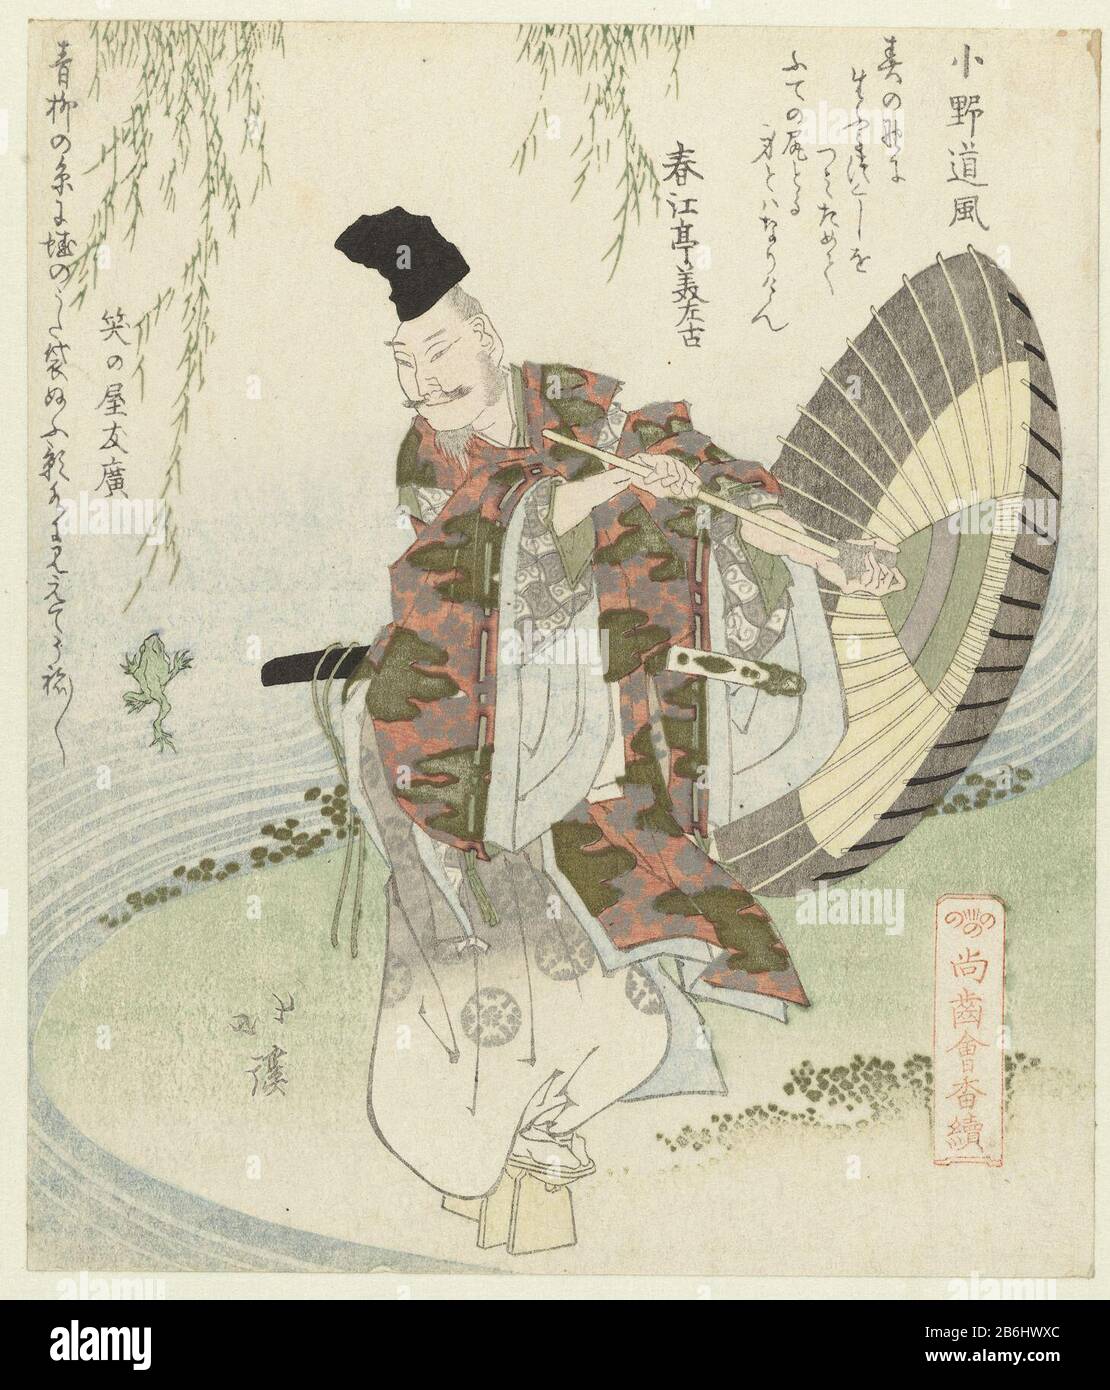 Ono no tofu, or Michikaze (894-966) with a parasol in hand, looking at a jumping frog. Ono no Tofu was one of the big three calligraphers during the Heian period (794-1185). This presentation refers to an event from his childhood, when he decided his writing career by putting on the edge of a pond, frog after endless attempts undertake saw to jump to a willow. Two gedichten. Manufacturer : printmaker: Totoya Hokkei (listed building) poet Yôchôtei Misako (listed building) poet Warainoya Tomohiro (listed property) Place manufacture: Japan Date: approx 1822 Physical characteristics: color woodblo Stock Photo